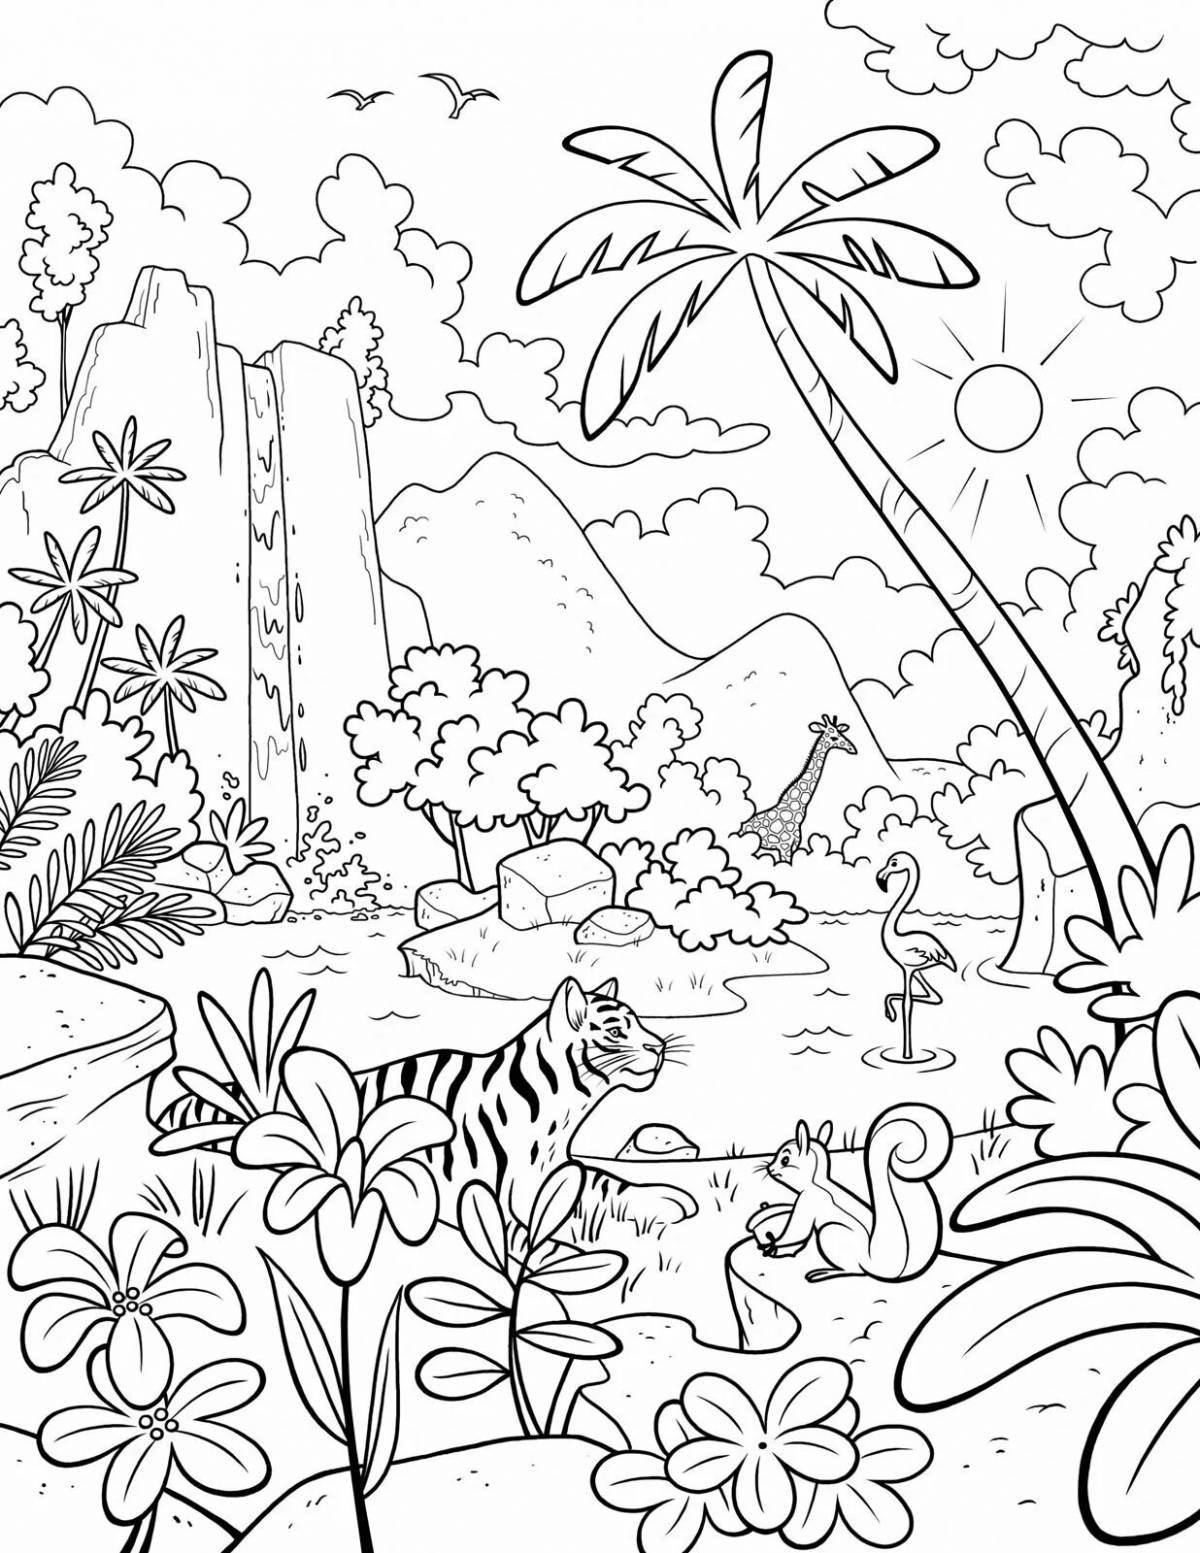 Violent nature coloring pages for boys